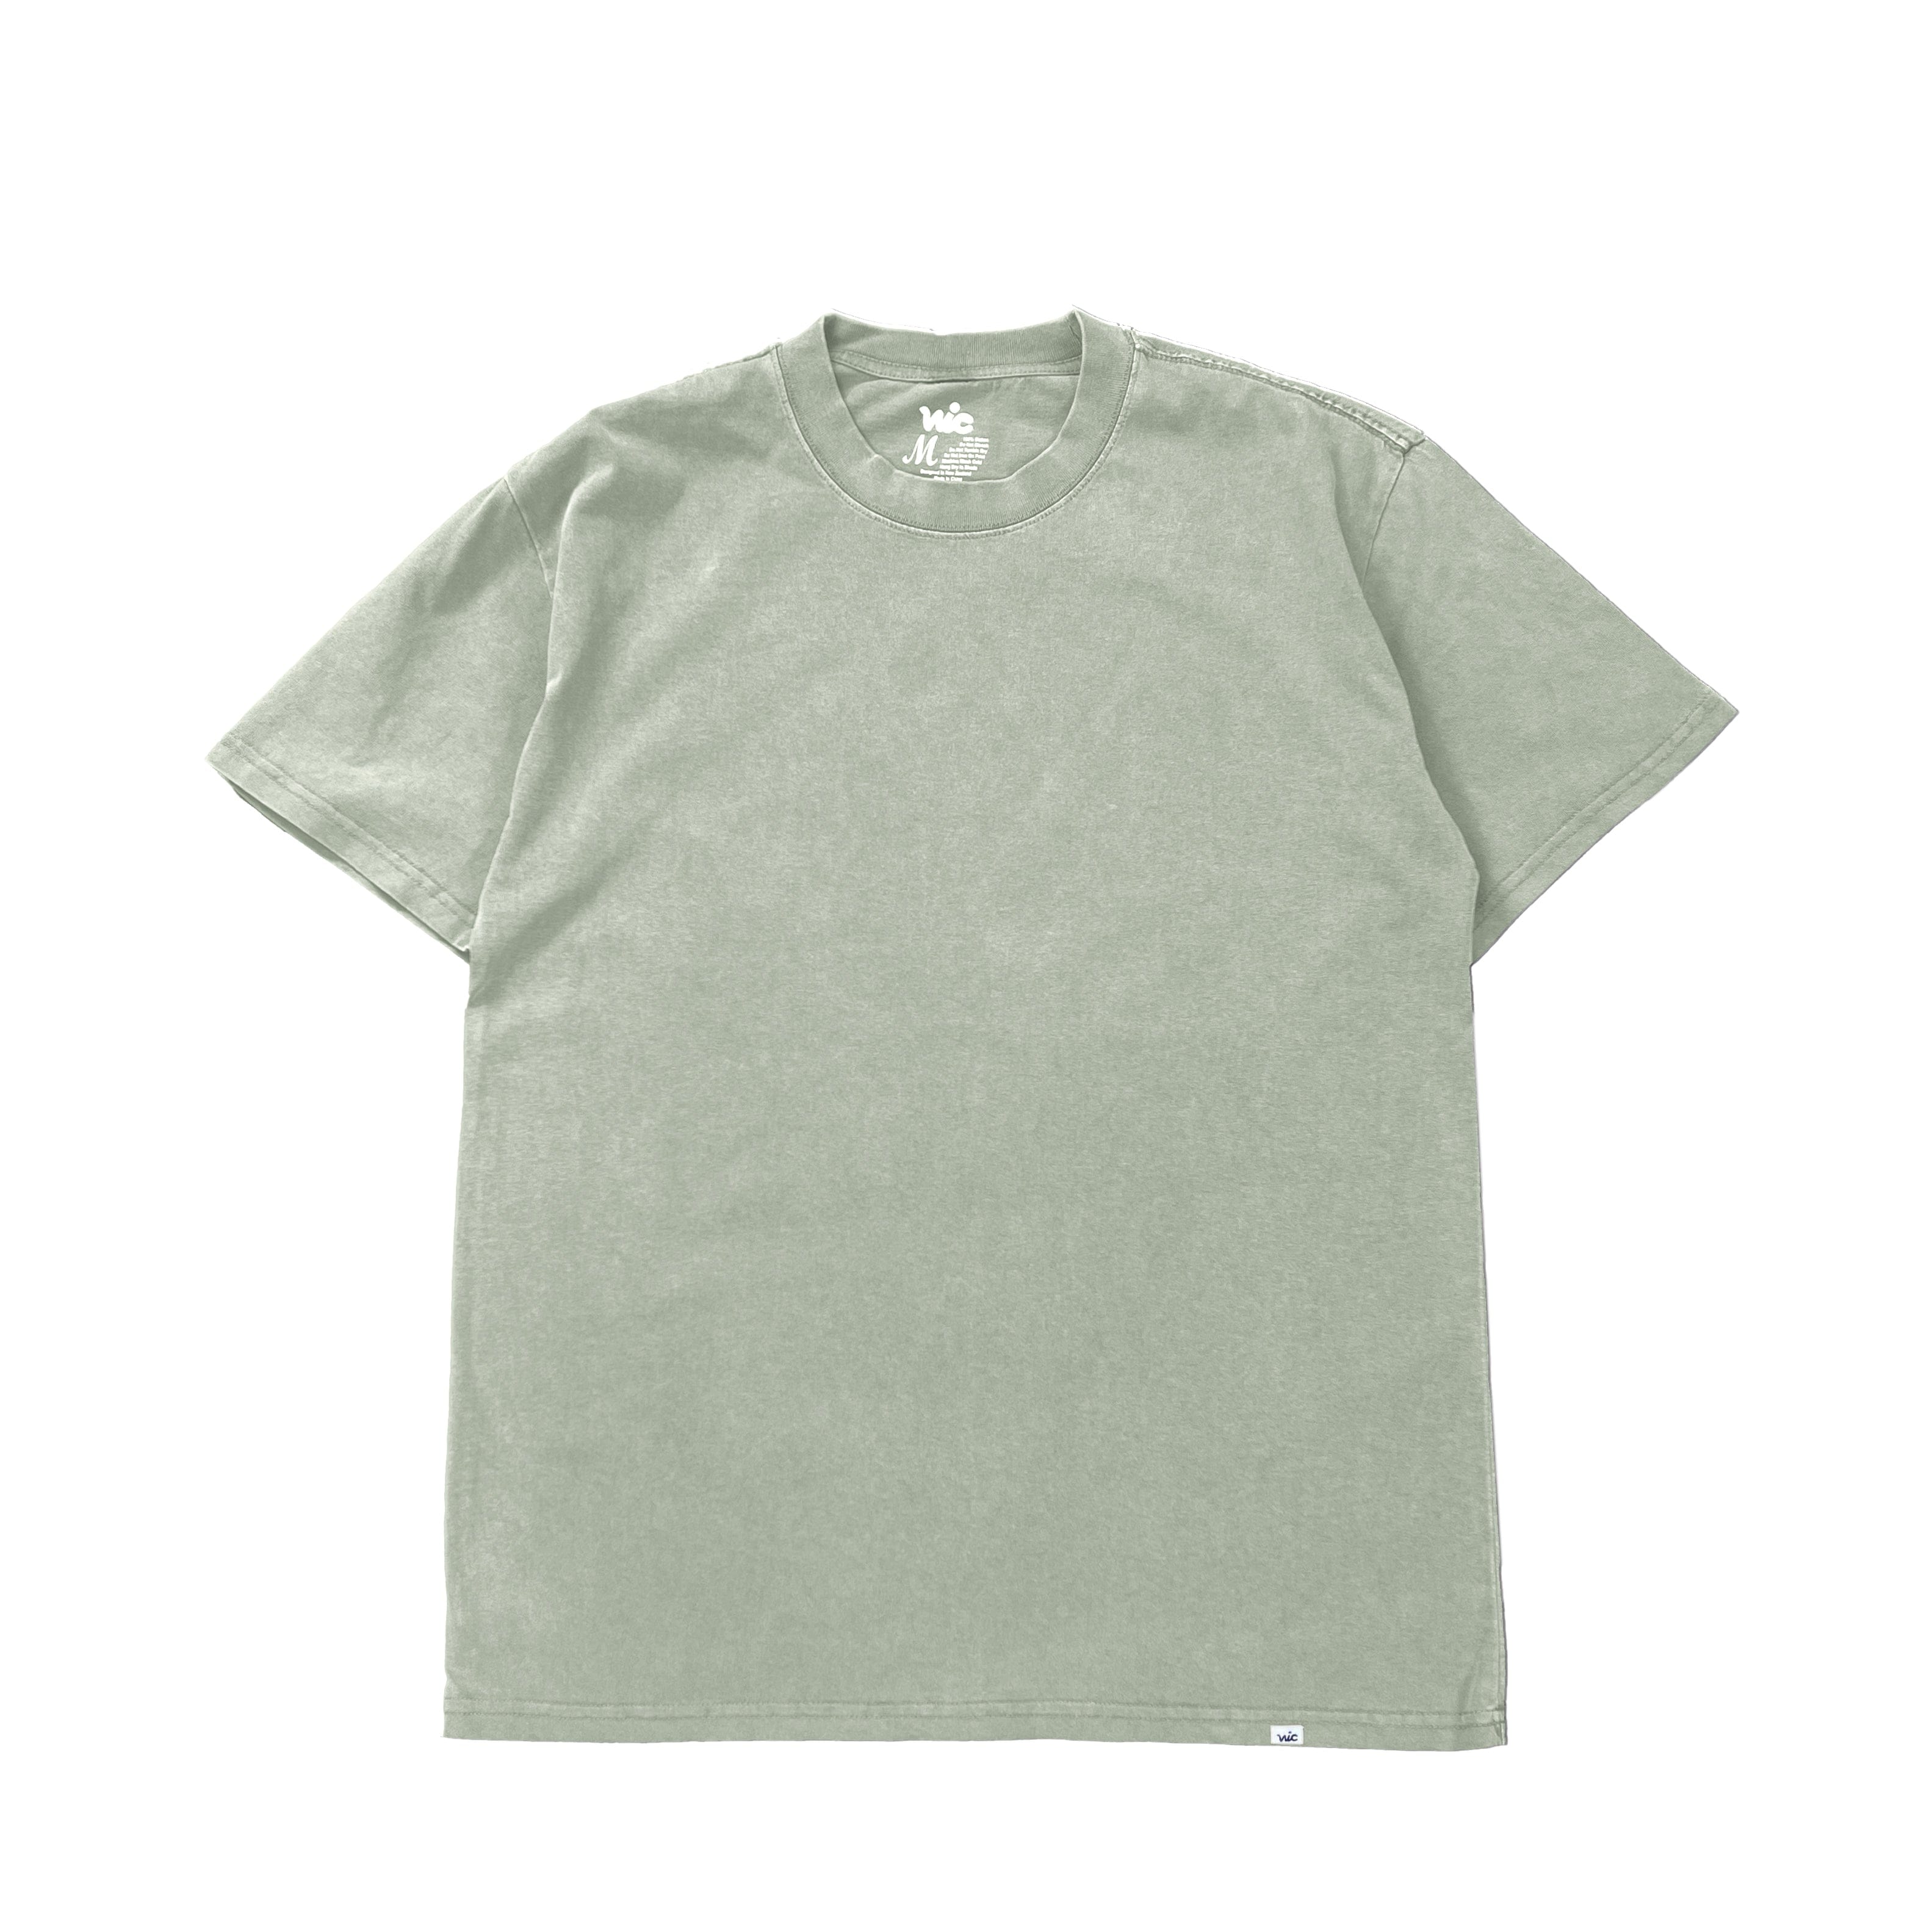 Inspired by the oversized warm-up sweaters and T-Shirts from the 90s, The Box Fit Tee is an essential the offers a wider, baggier fit, and cut from 100% smooth cotton jersey for that premium quality feel. As this silhouette is very oversized and loose-fitting, we recommend sizing down to achieve the perfect Box Fit style. Faded eucalyptus, garment dyed